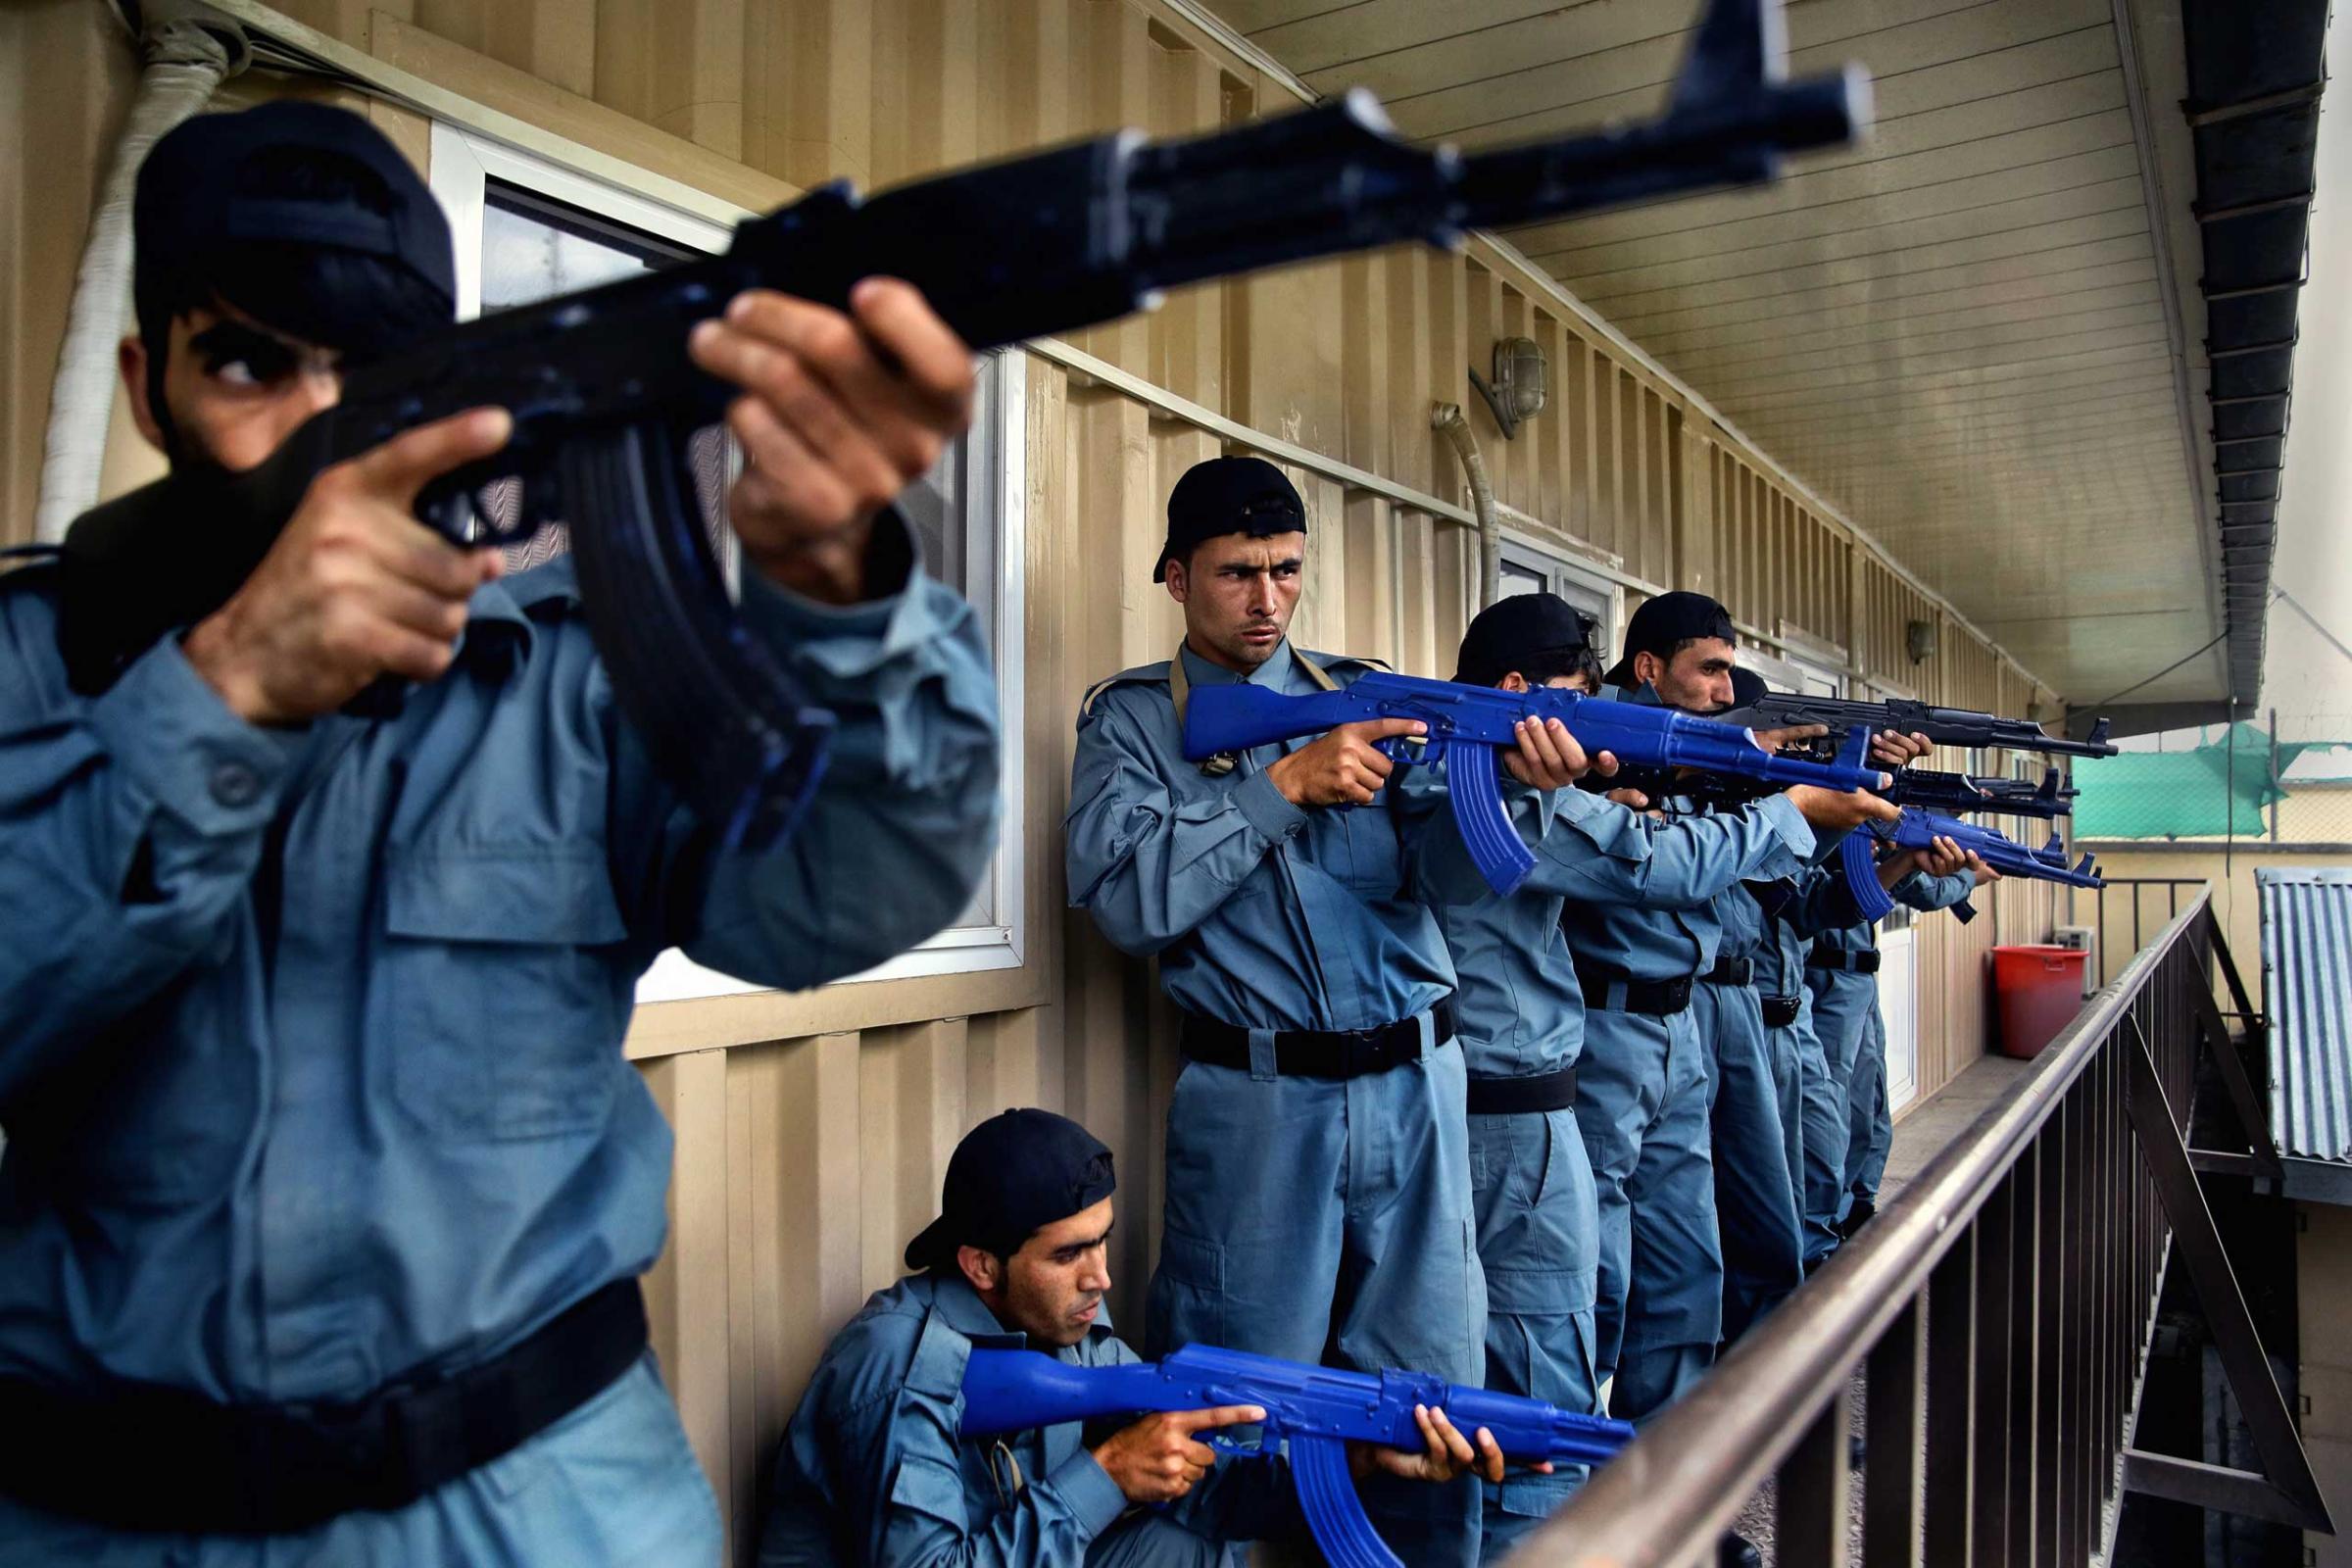 Afghan National Police officers from the Anti-Narcotics Quick Reaction Force (ANQRF) carry out a raid scenario exercise intended for drug traffickers at a training centre in Kabul on Aug. 25, 2014.